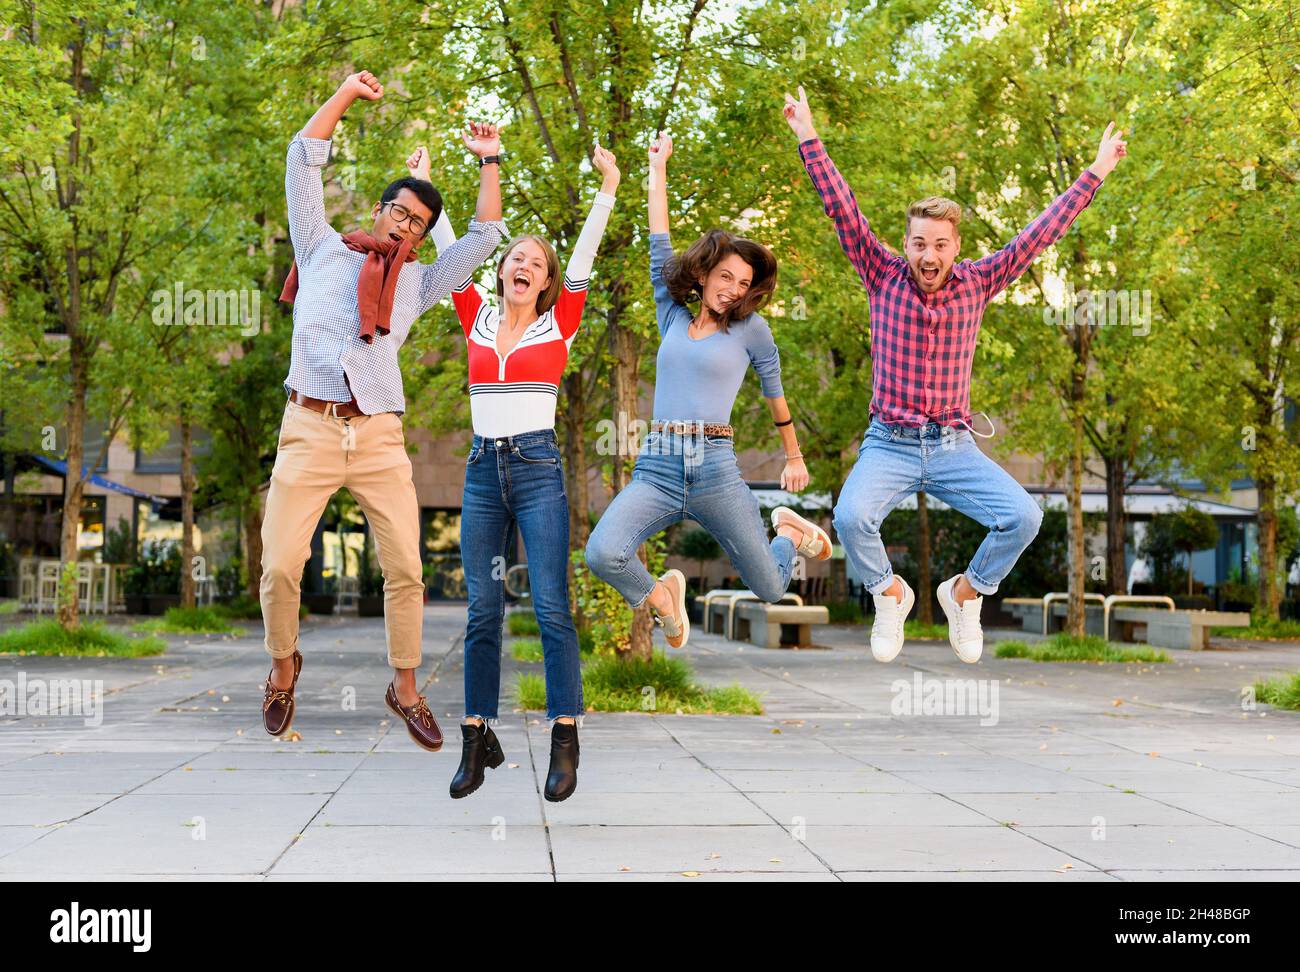 Group of exuberant diverse young friends cheering and leaping in the air with arms raised in celebration outdoors in a park Stock Photo